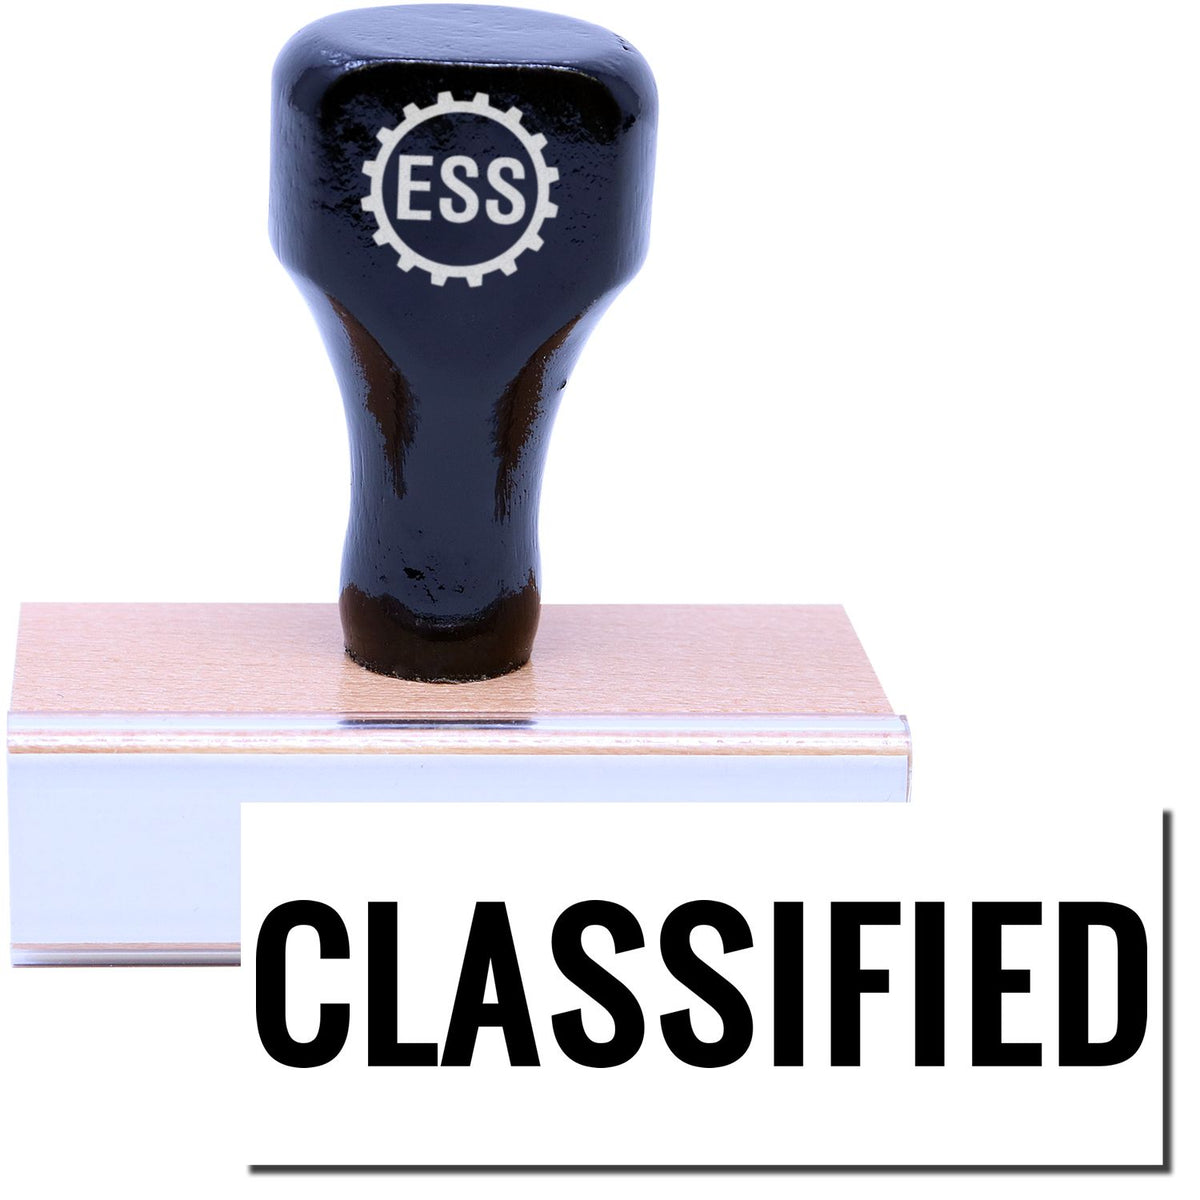 A stock office rubber stamp with a stamped image showing how the text &quot;CLASSIFIED&quot; is displayed after stamping.